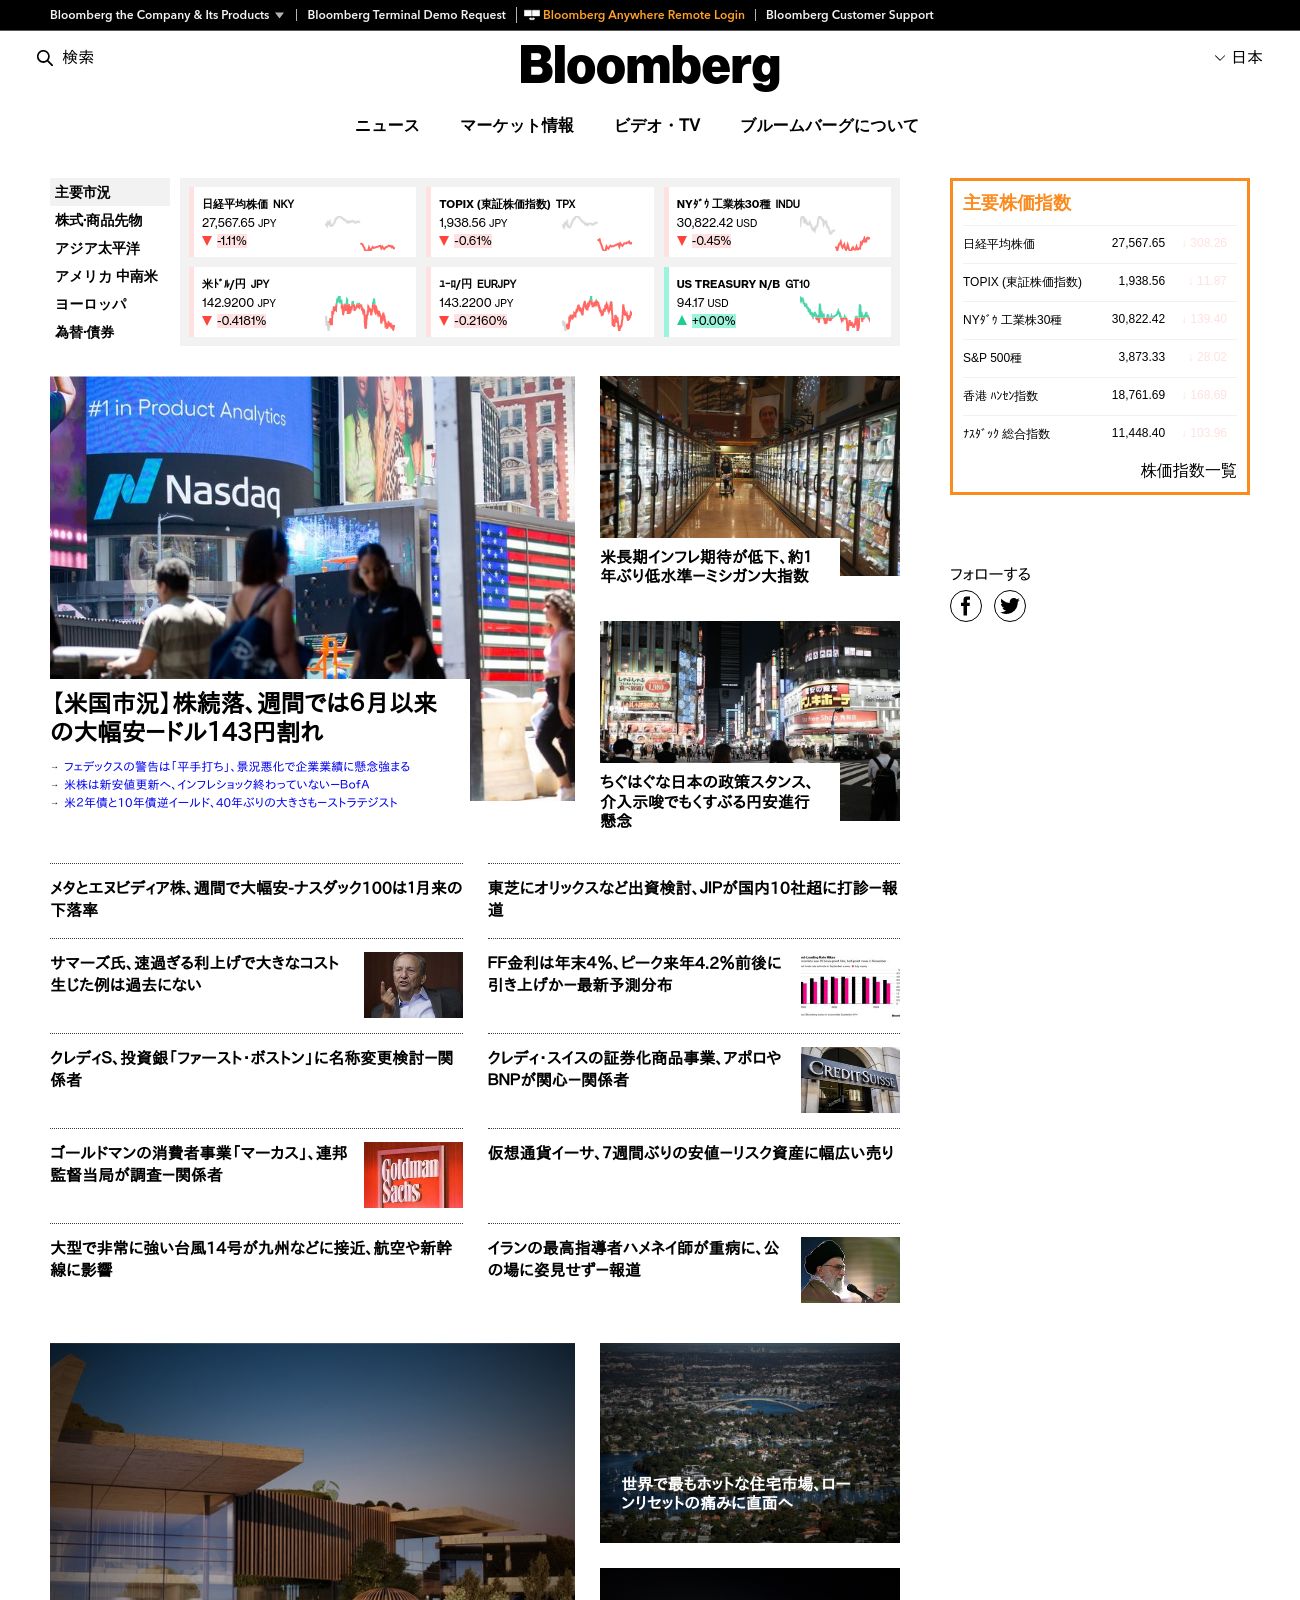 Bloomberg Japan at 2022-09-18 11:20:41+09:00 local time